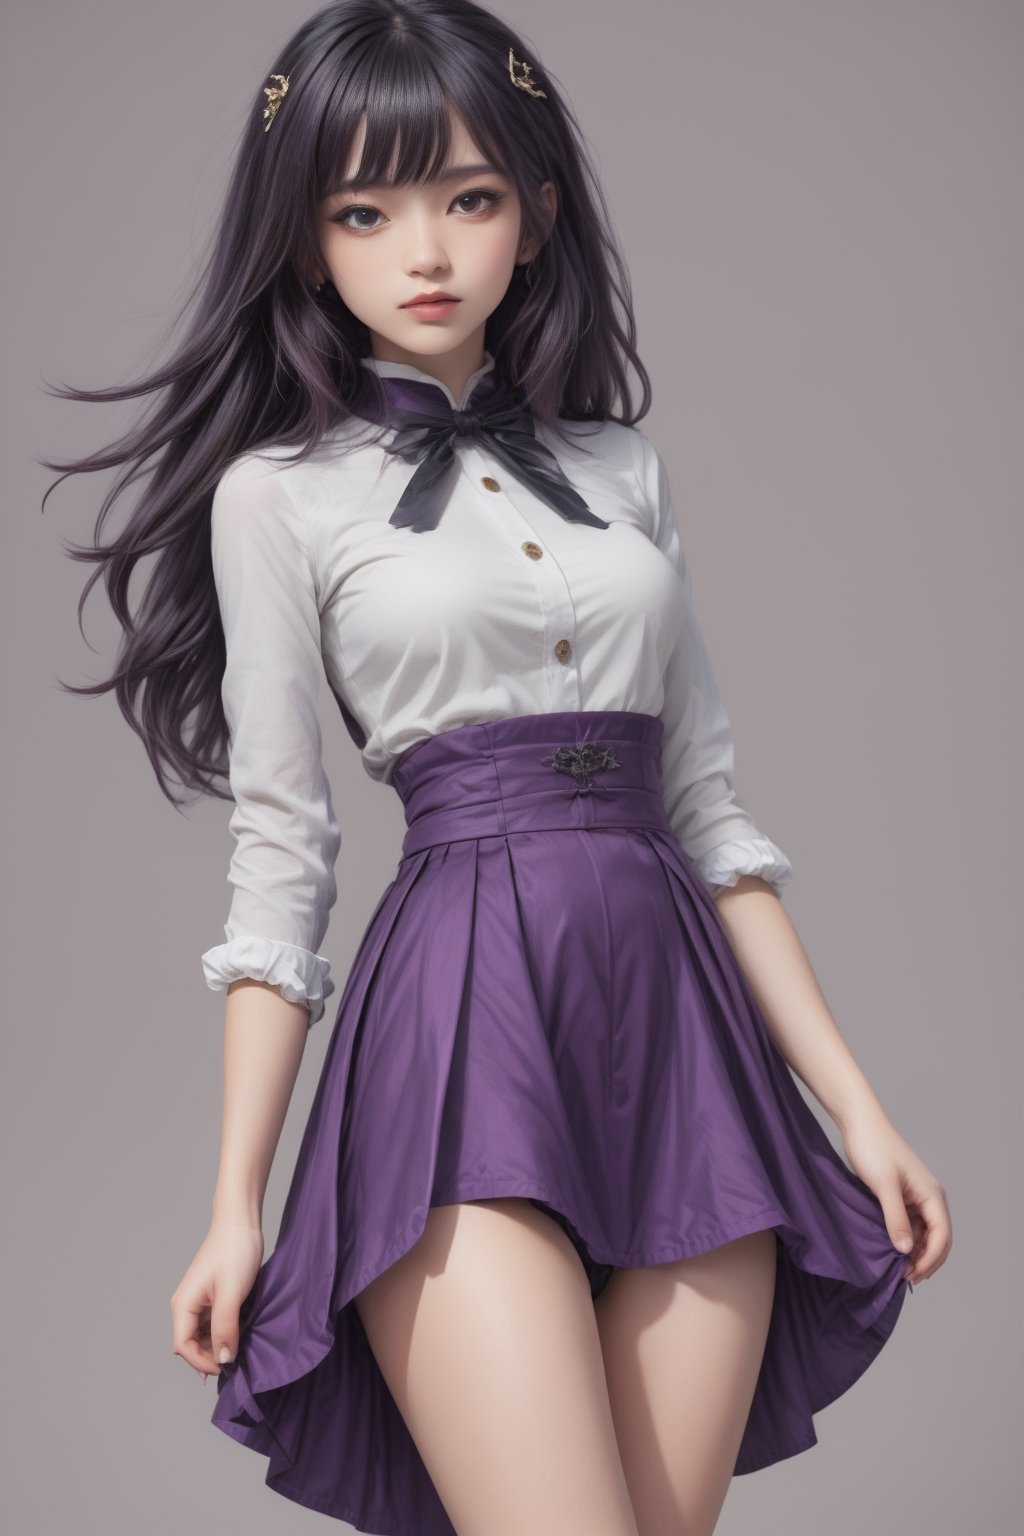 1girl-in-her-20s, shameless-bishoujo, mix-of-natural-hair-styles, unique-physique, no-virgin-anymore, realistic-detailed-skin, (((Ultra-HD-photo-same-realistic-quality-details))), remarkable-colors, Frilled white shirt paired with a pleated metallic long skirt and slingback pumps, vaginal-sex-pov, all-four-ass-up, supporting-pose, (((relaxed))), optimal-lighting, Enhanced All, dfdd, xiyan,,<lora:659095807385103906:1.0>